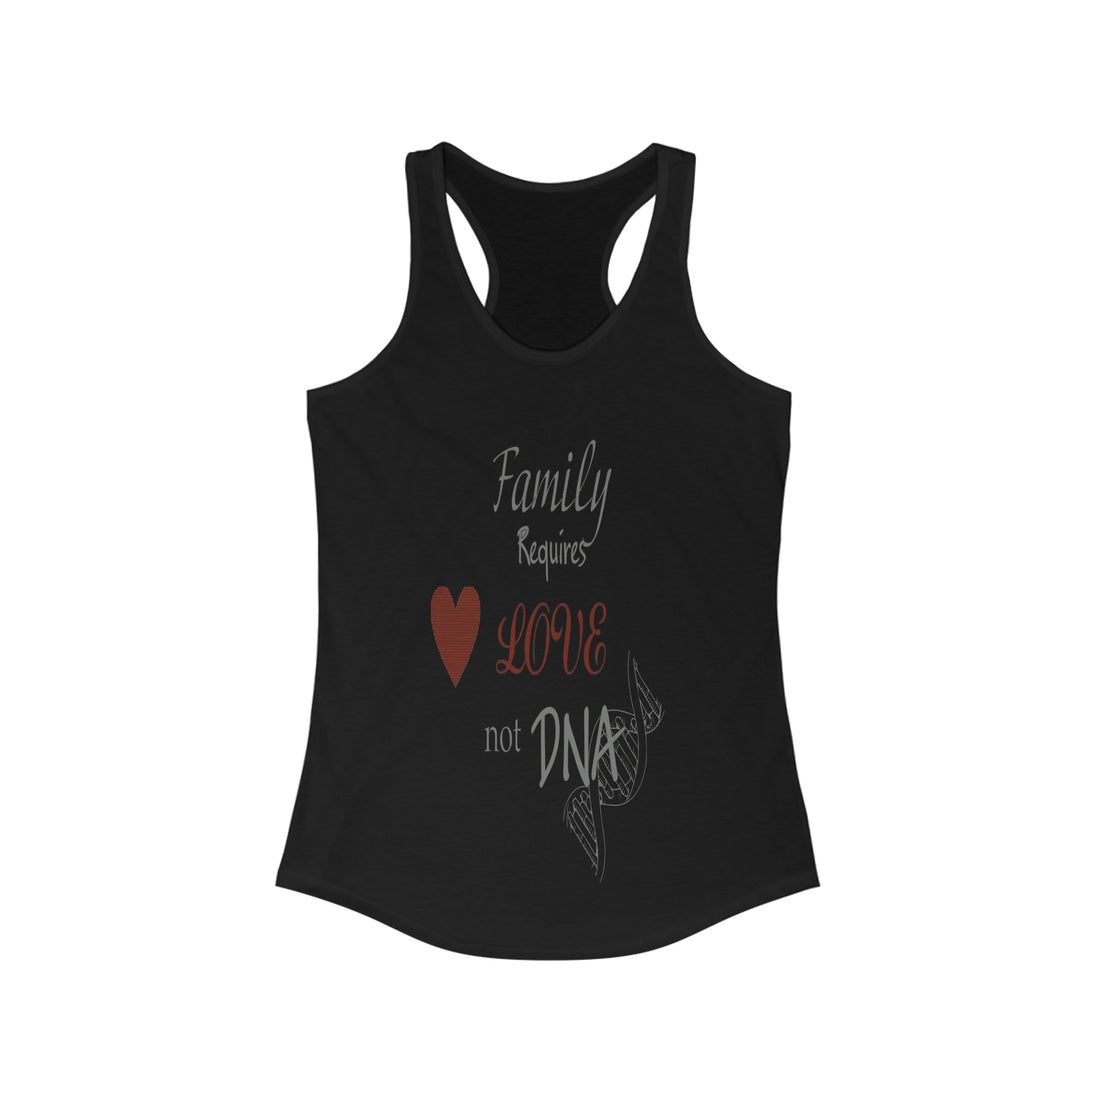 Family Requires Love not DNA - Racerback Tank